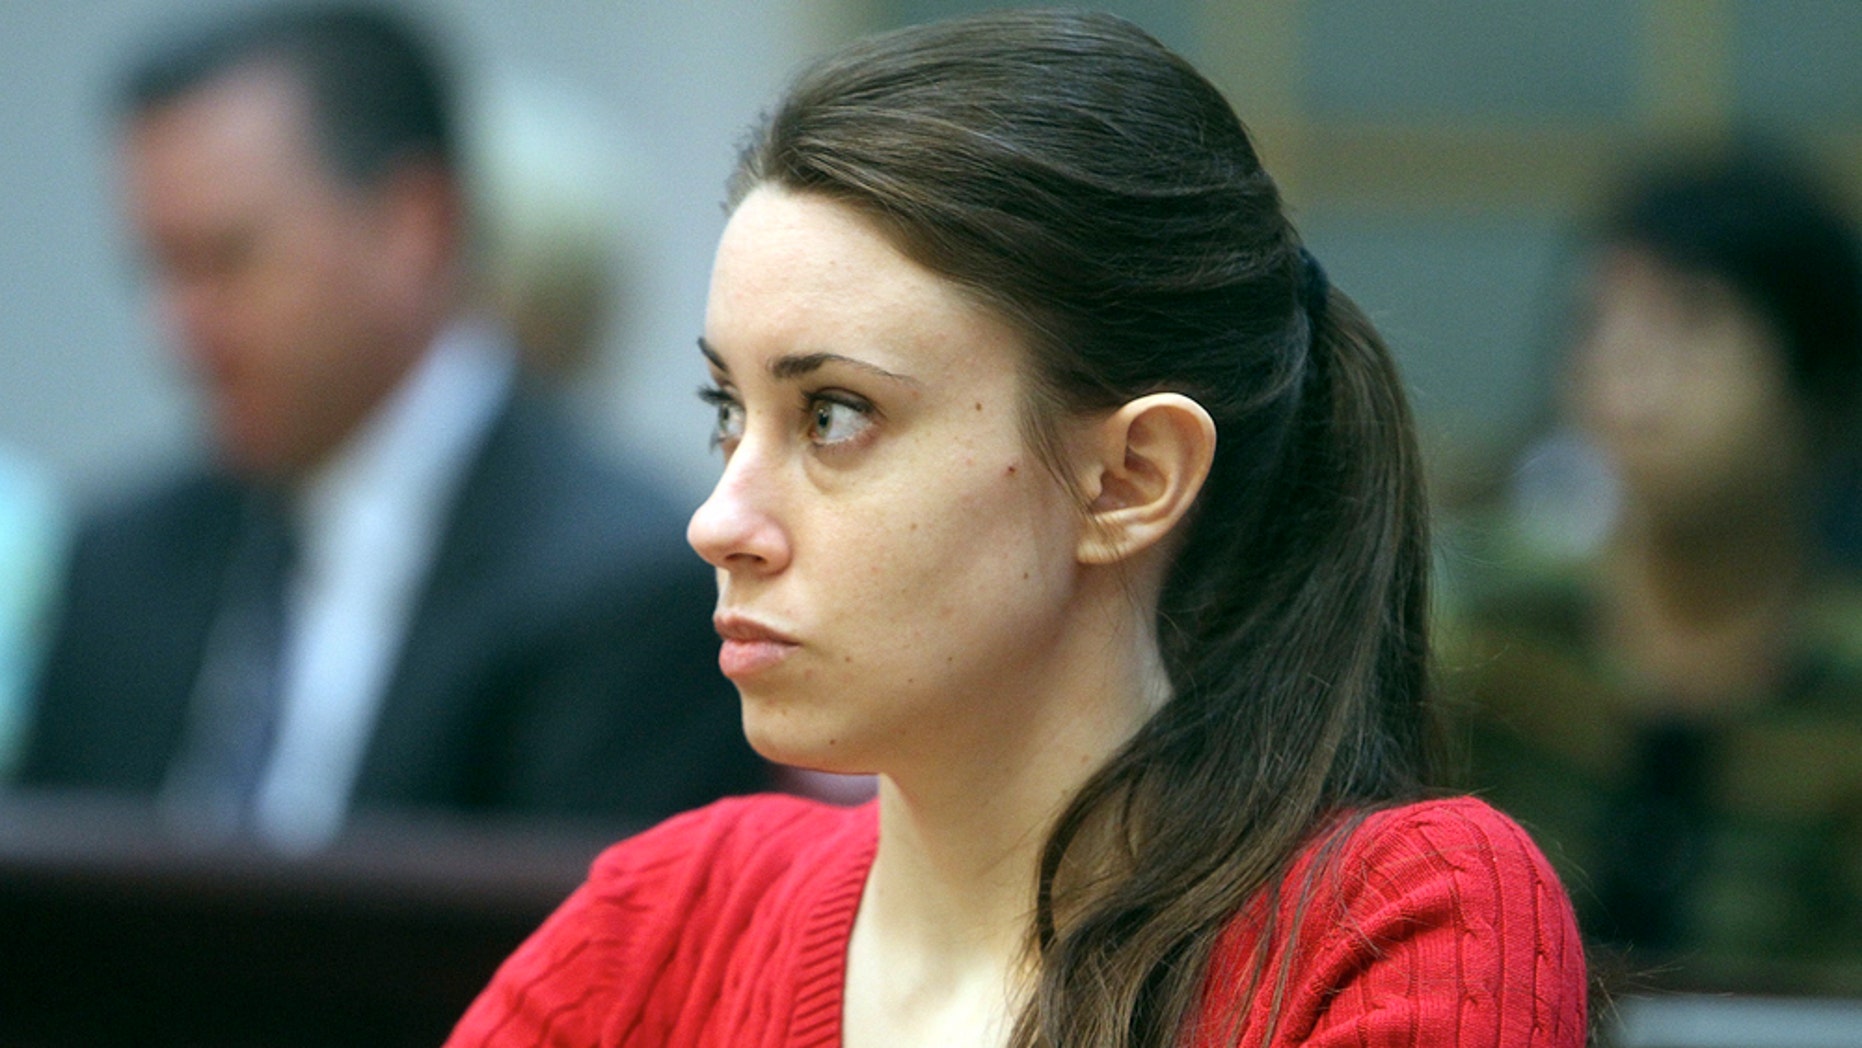 Names of Casey Anthony Jurors Released in Florida Fox News